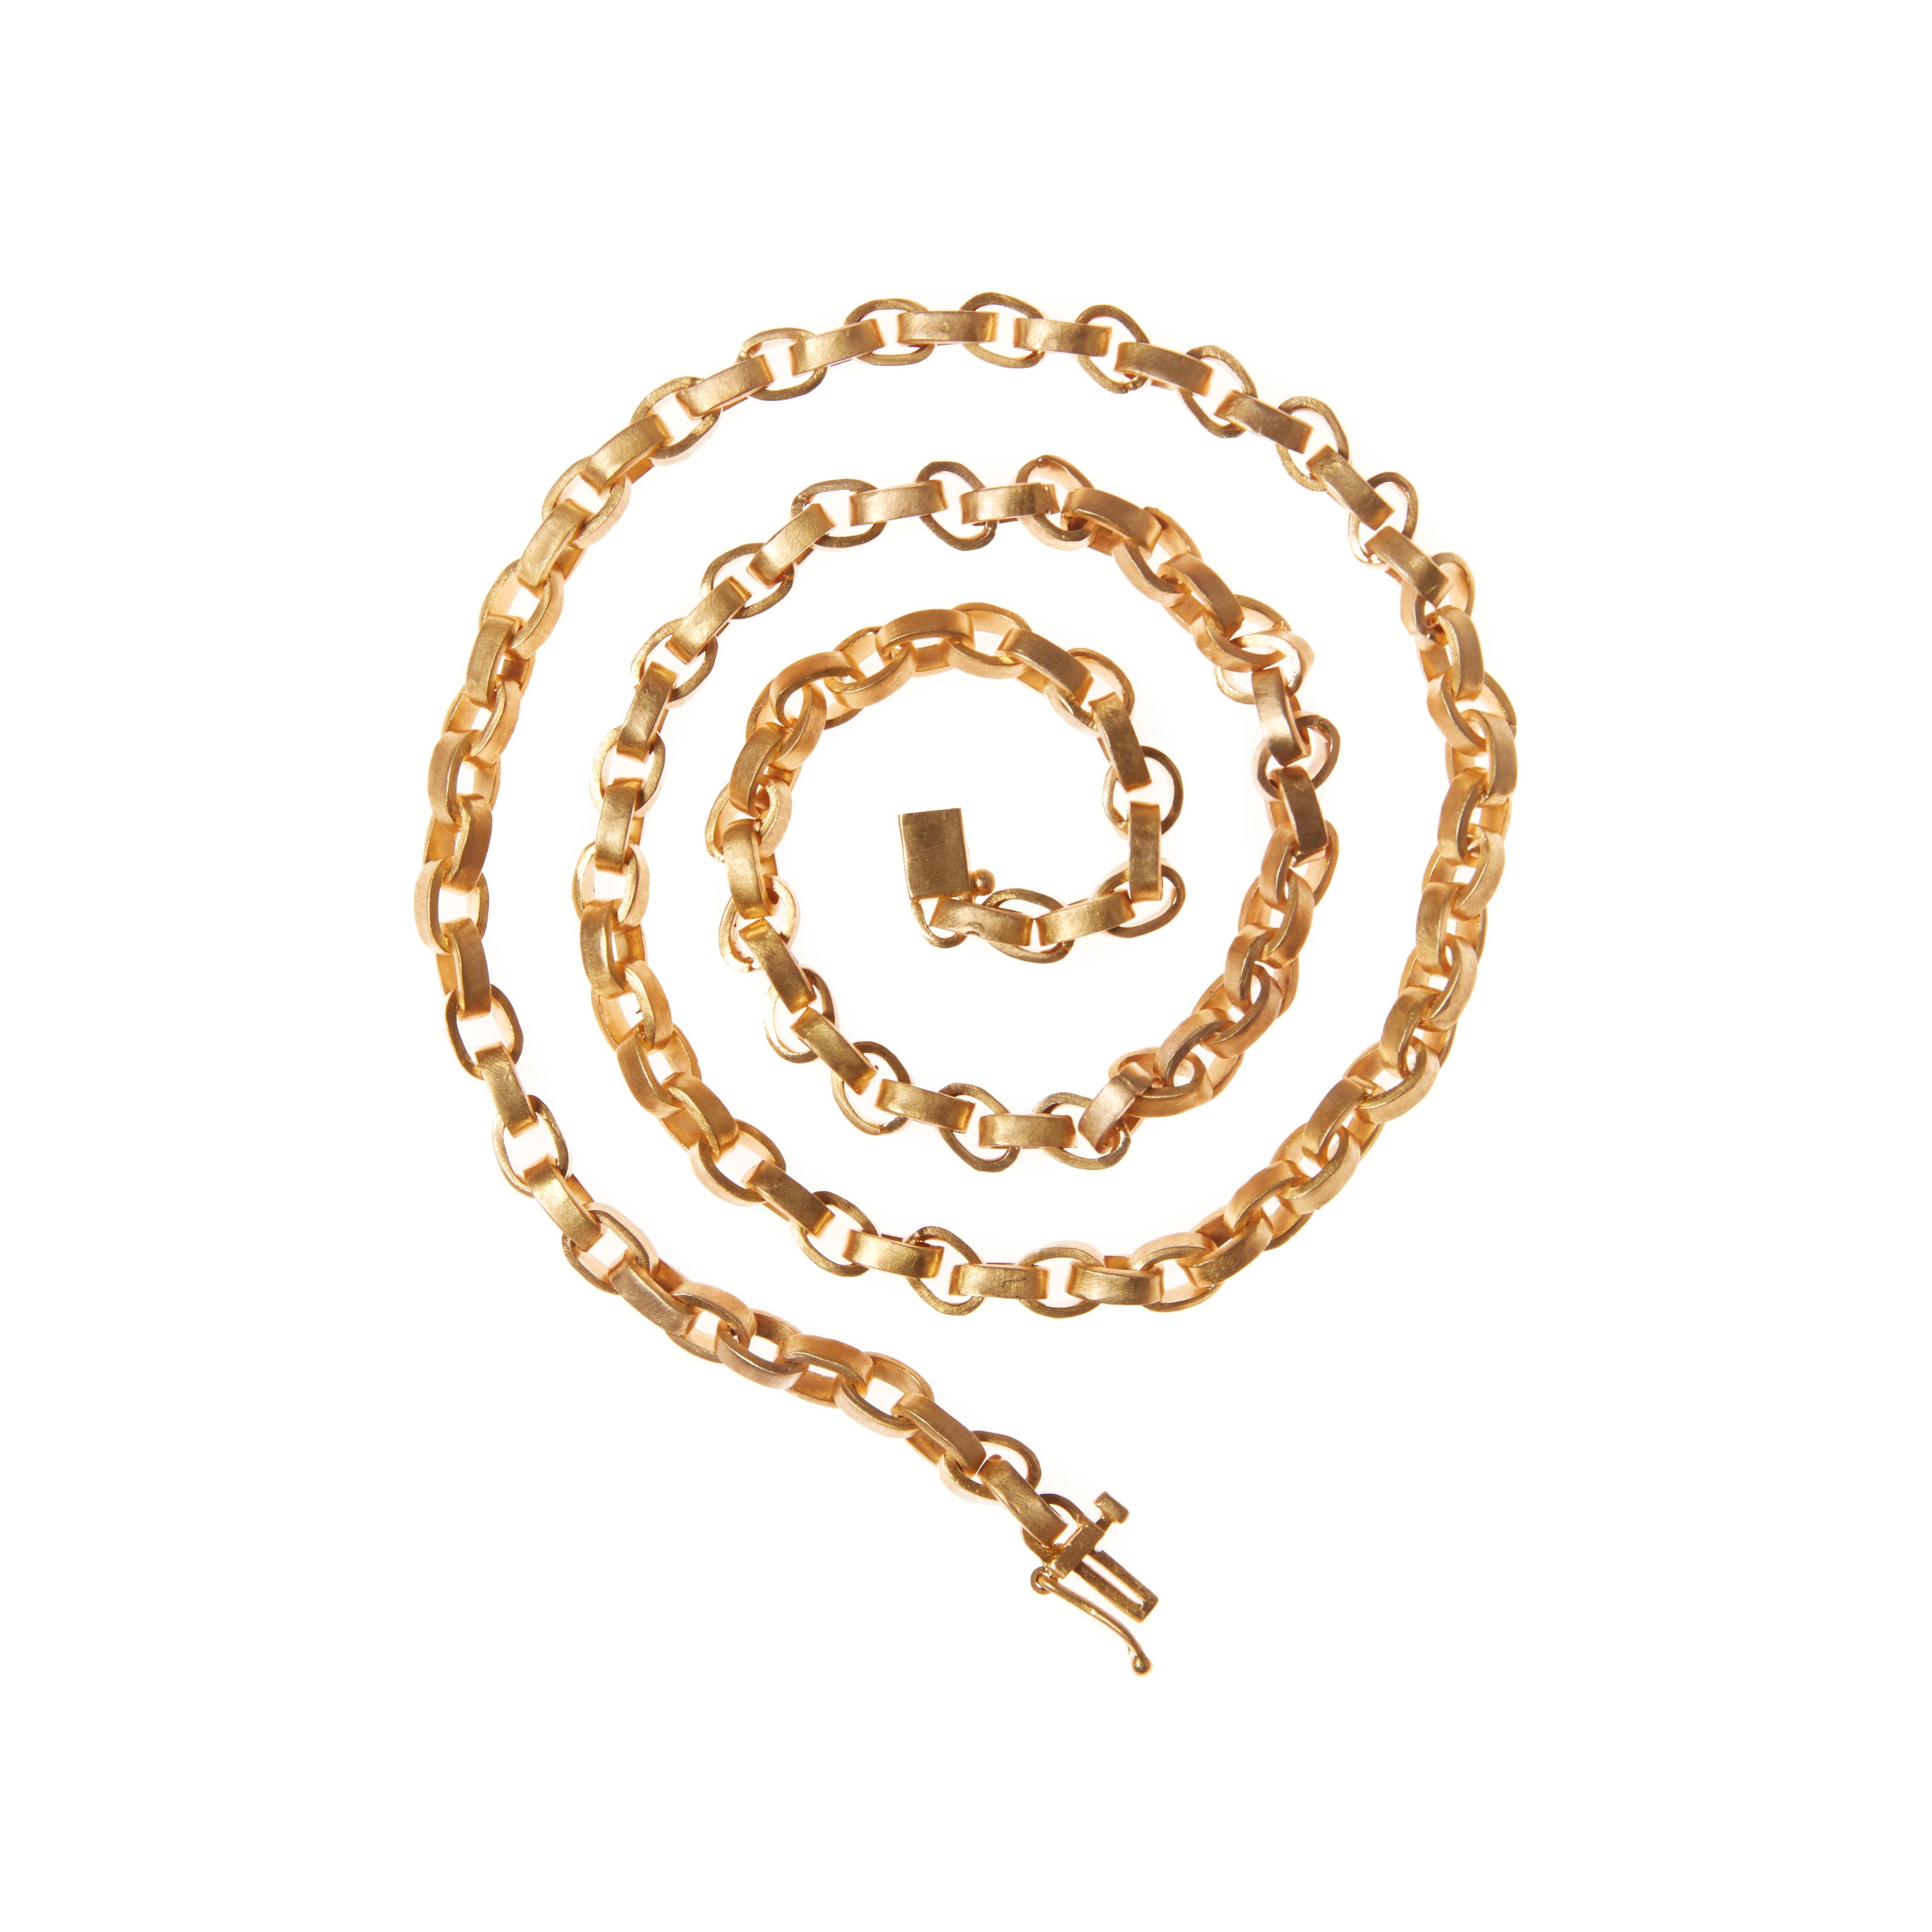 Darius Jewels Signature Chain is crafted entirely by hand and includes the designer's signature clasp featuring a double lock closure. 

18K Yellow Gold
17